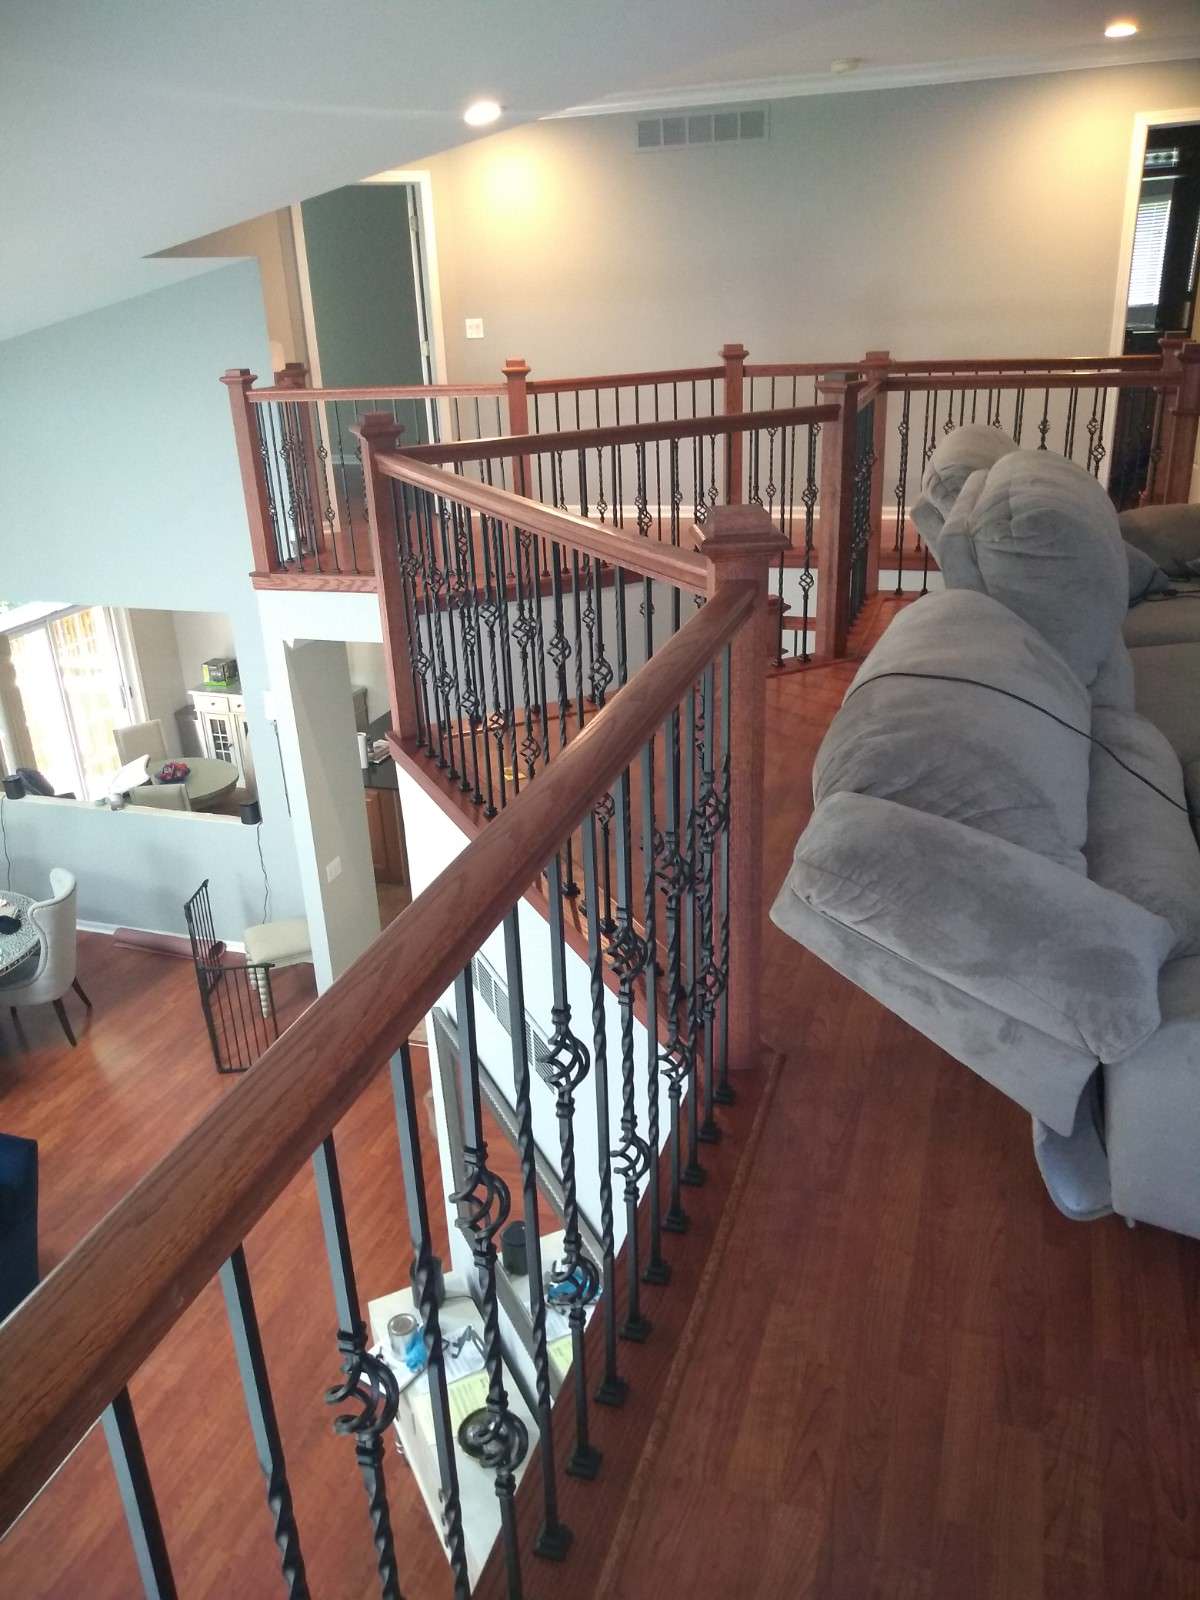 12 section balcony and stairs